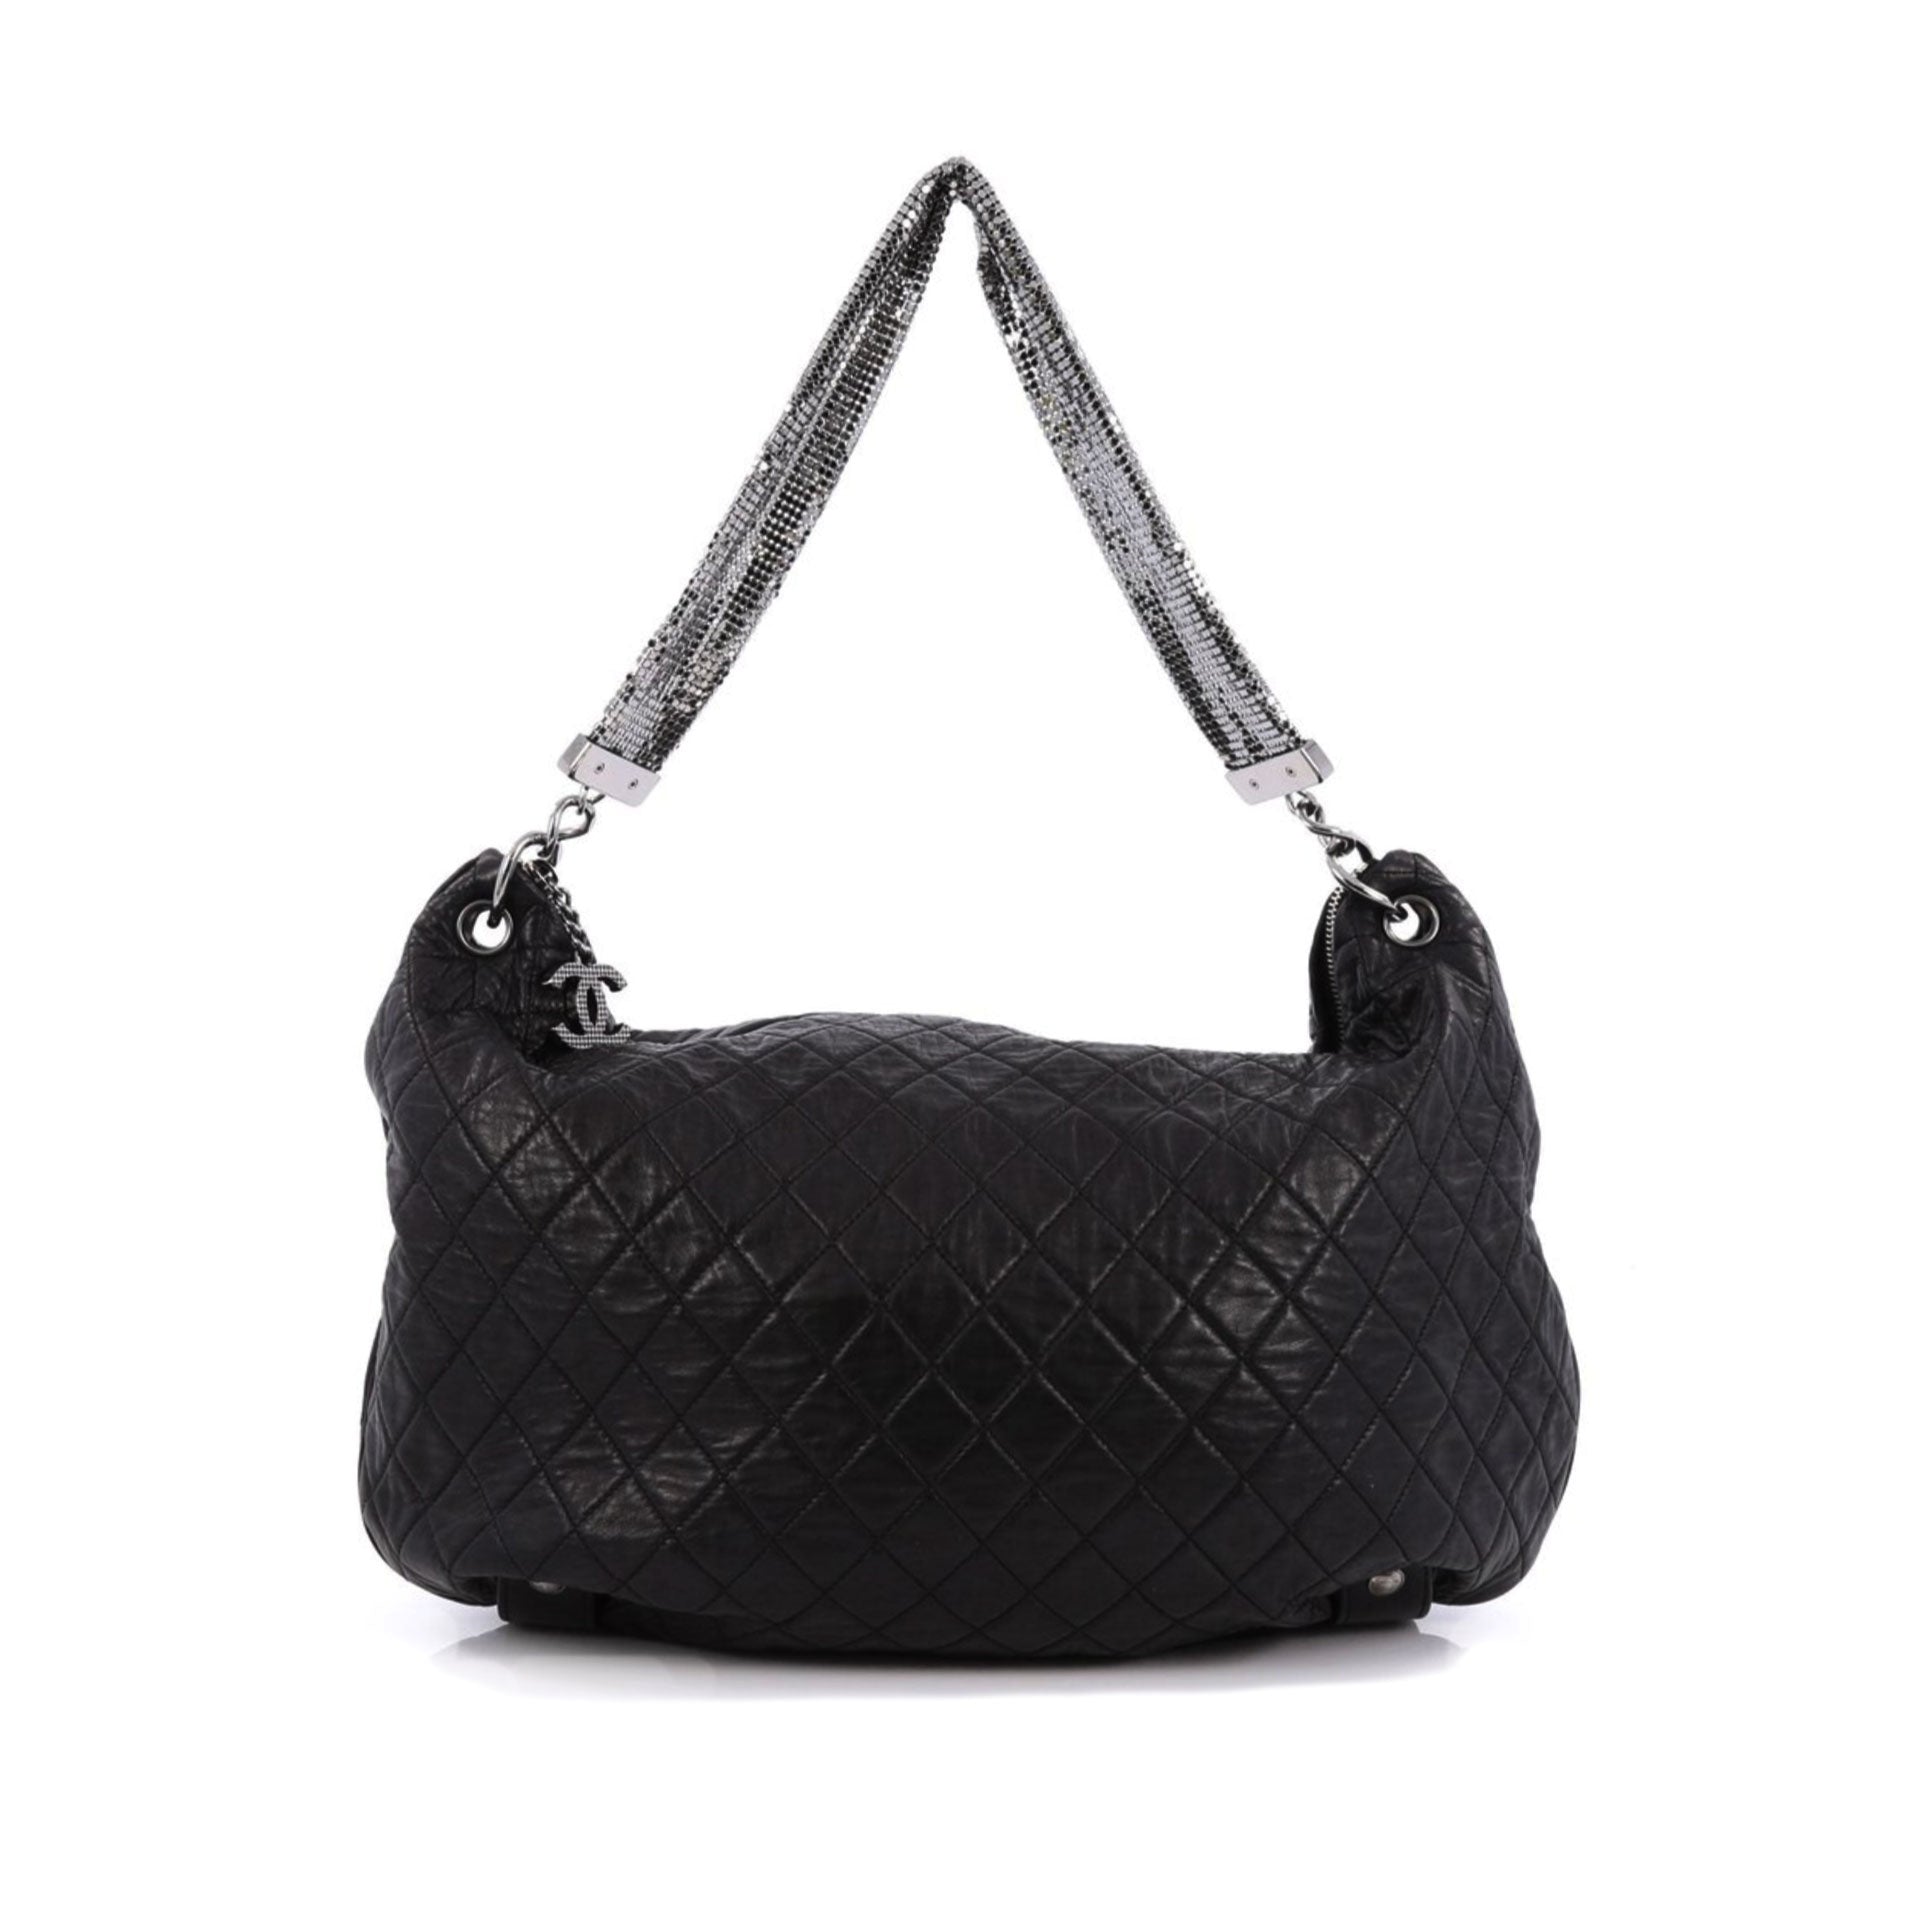 CHANEL HOBO HANDBAG IN BLACK QUILTED LEATHER LOGO CC QUILTED BAG